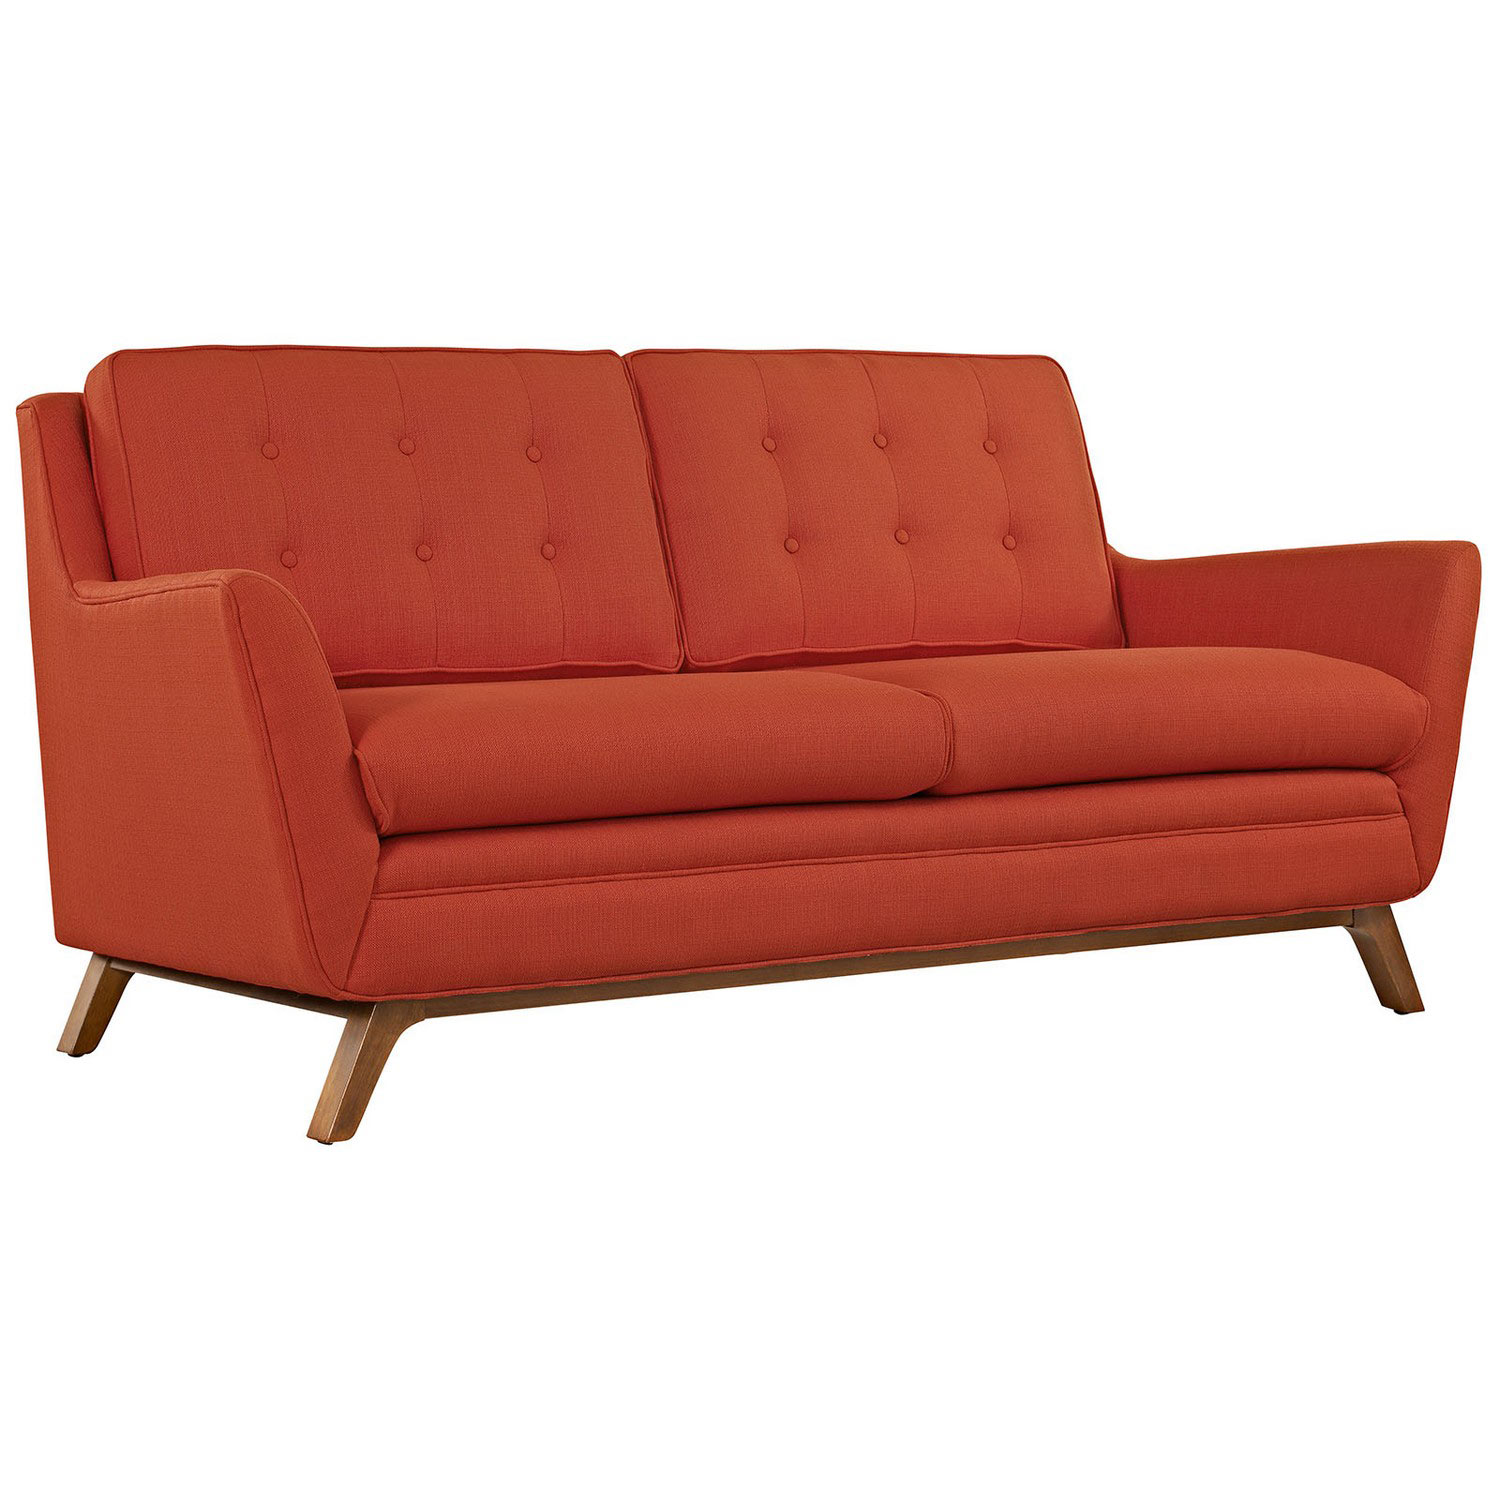 Modway Beguile Fabric Loveseat - Atomic Red